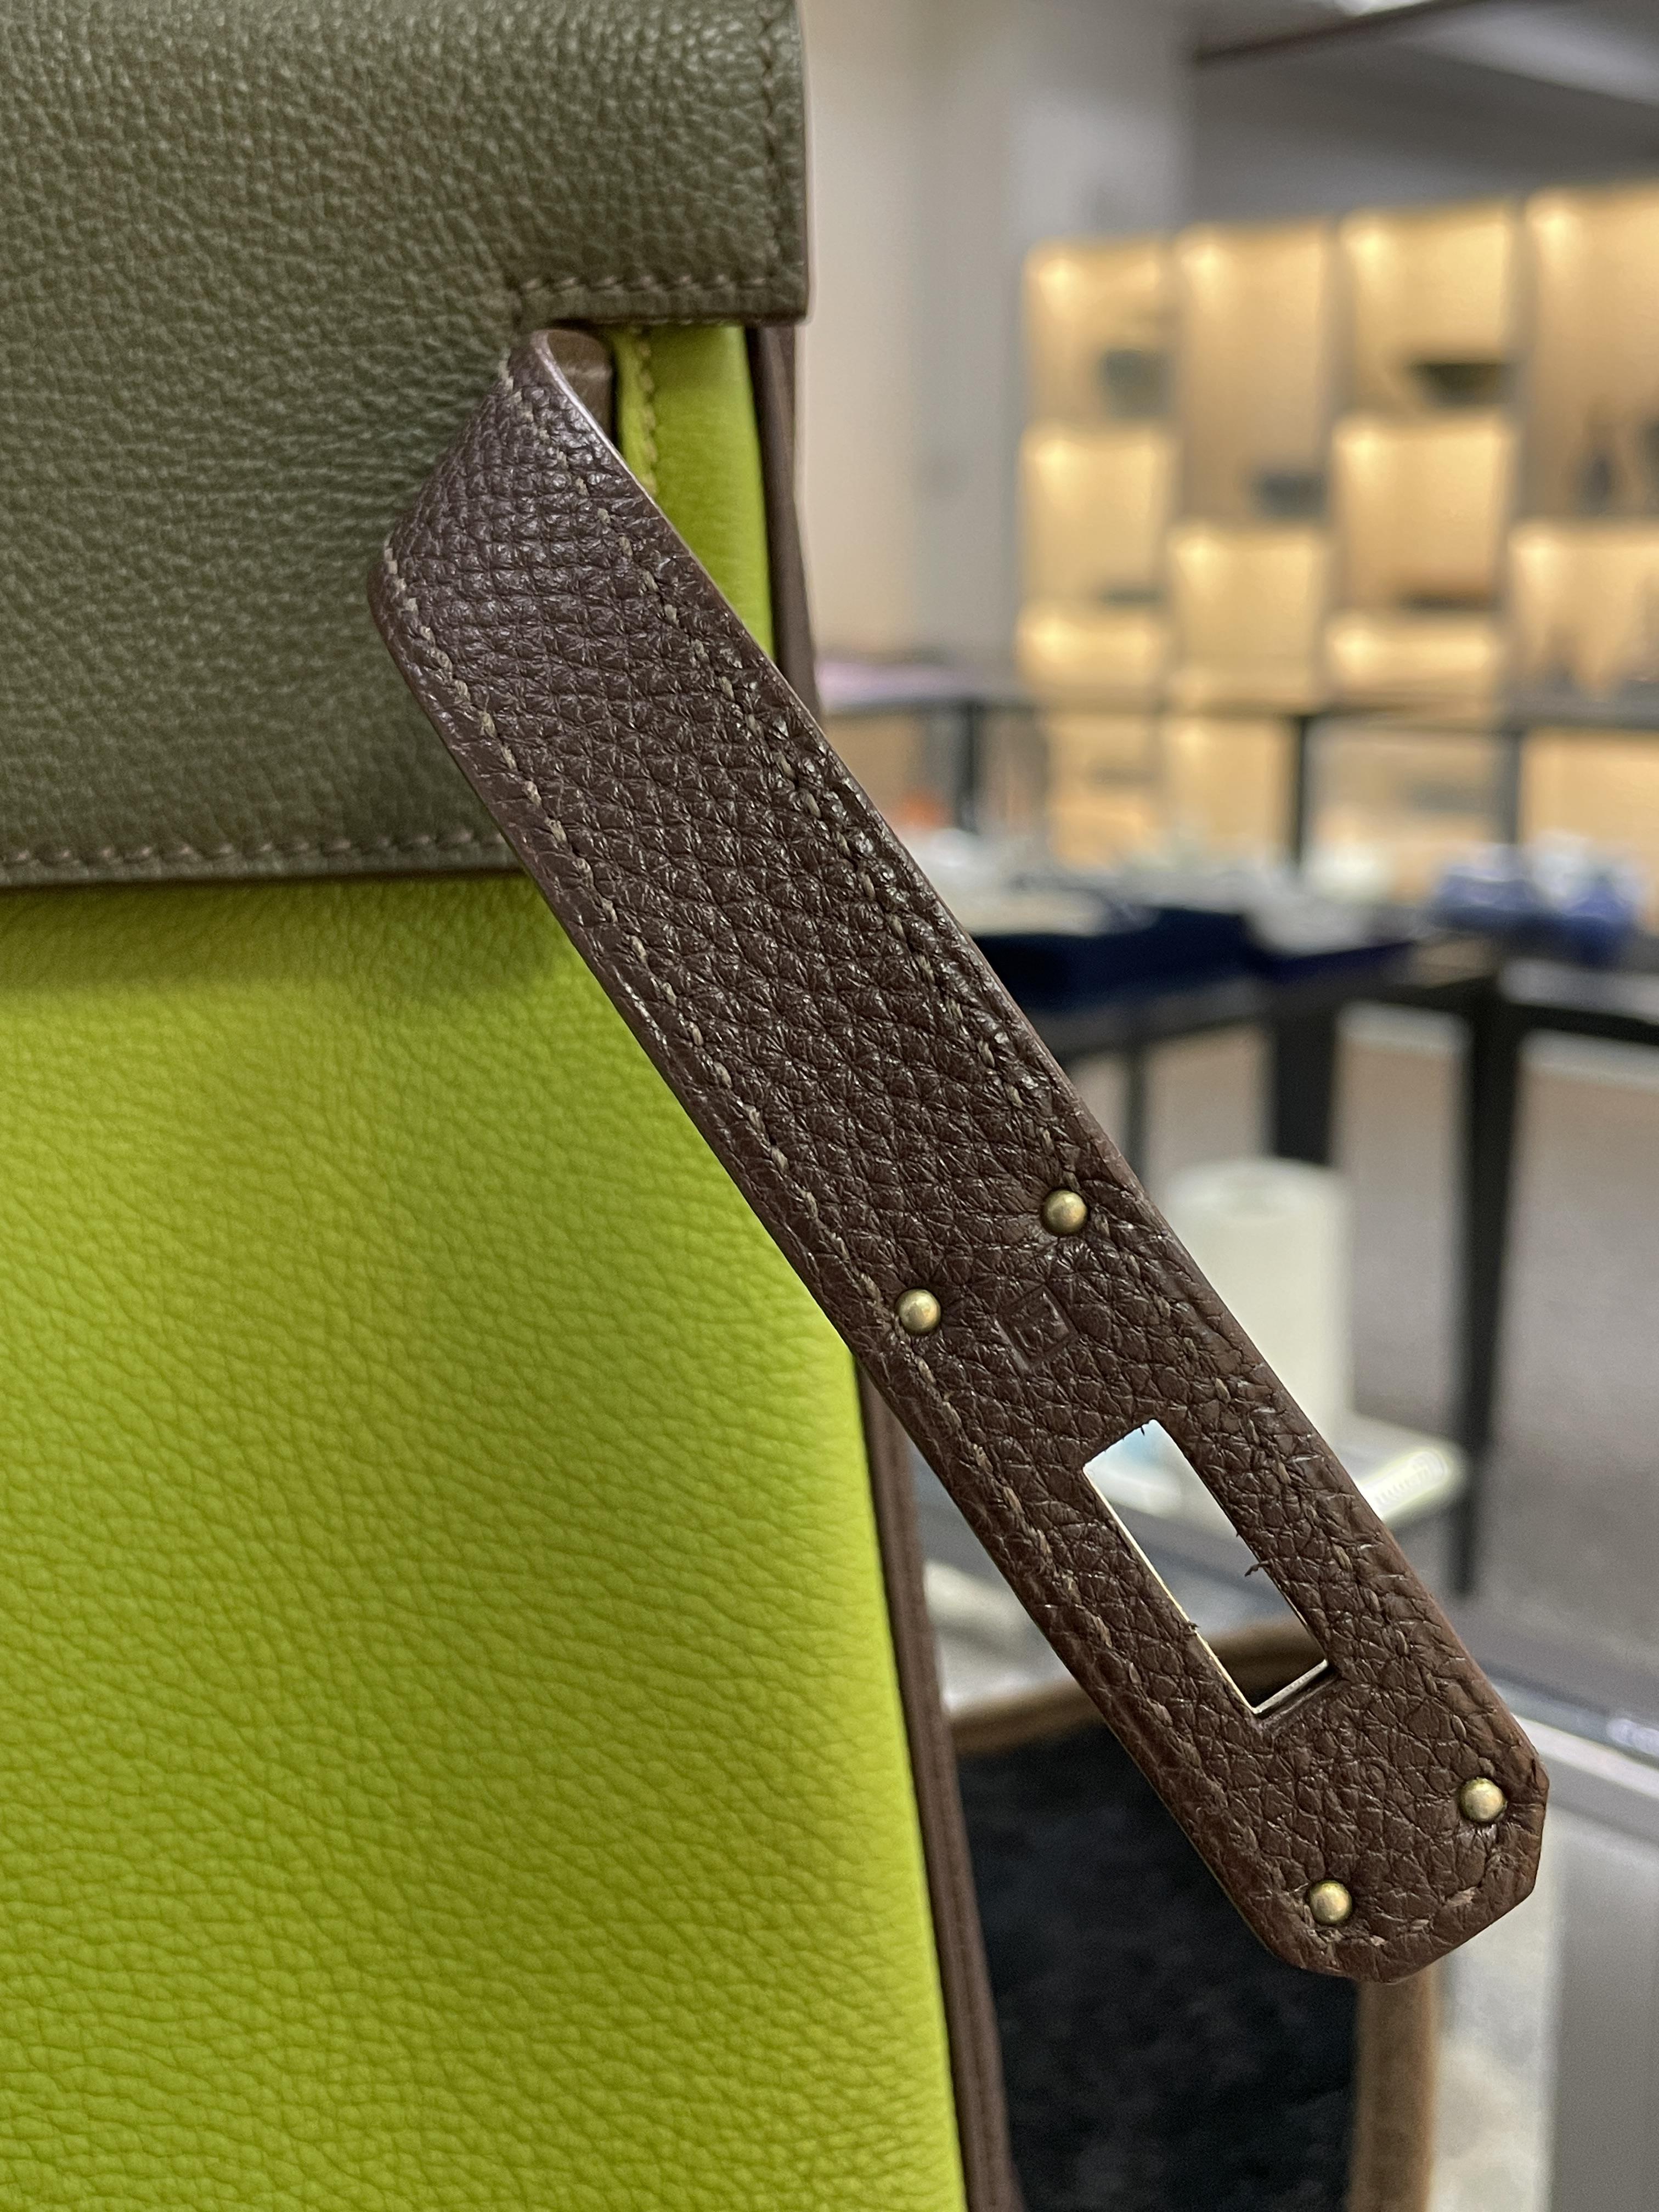 AN HERMÈS TRICOLOR KELLY 32 - Image 26 of 28